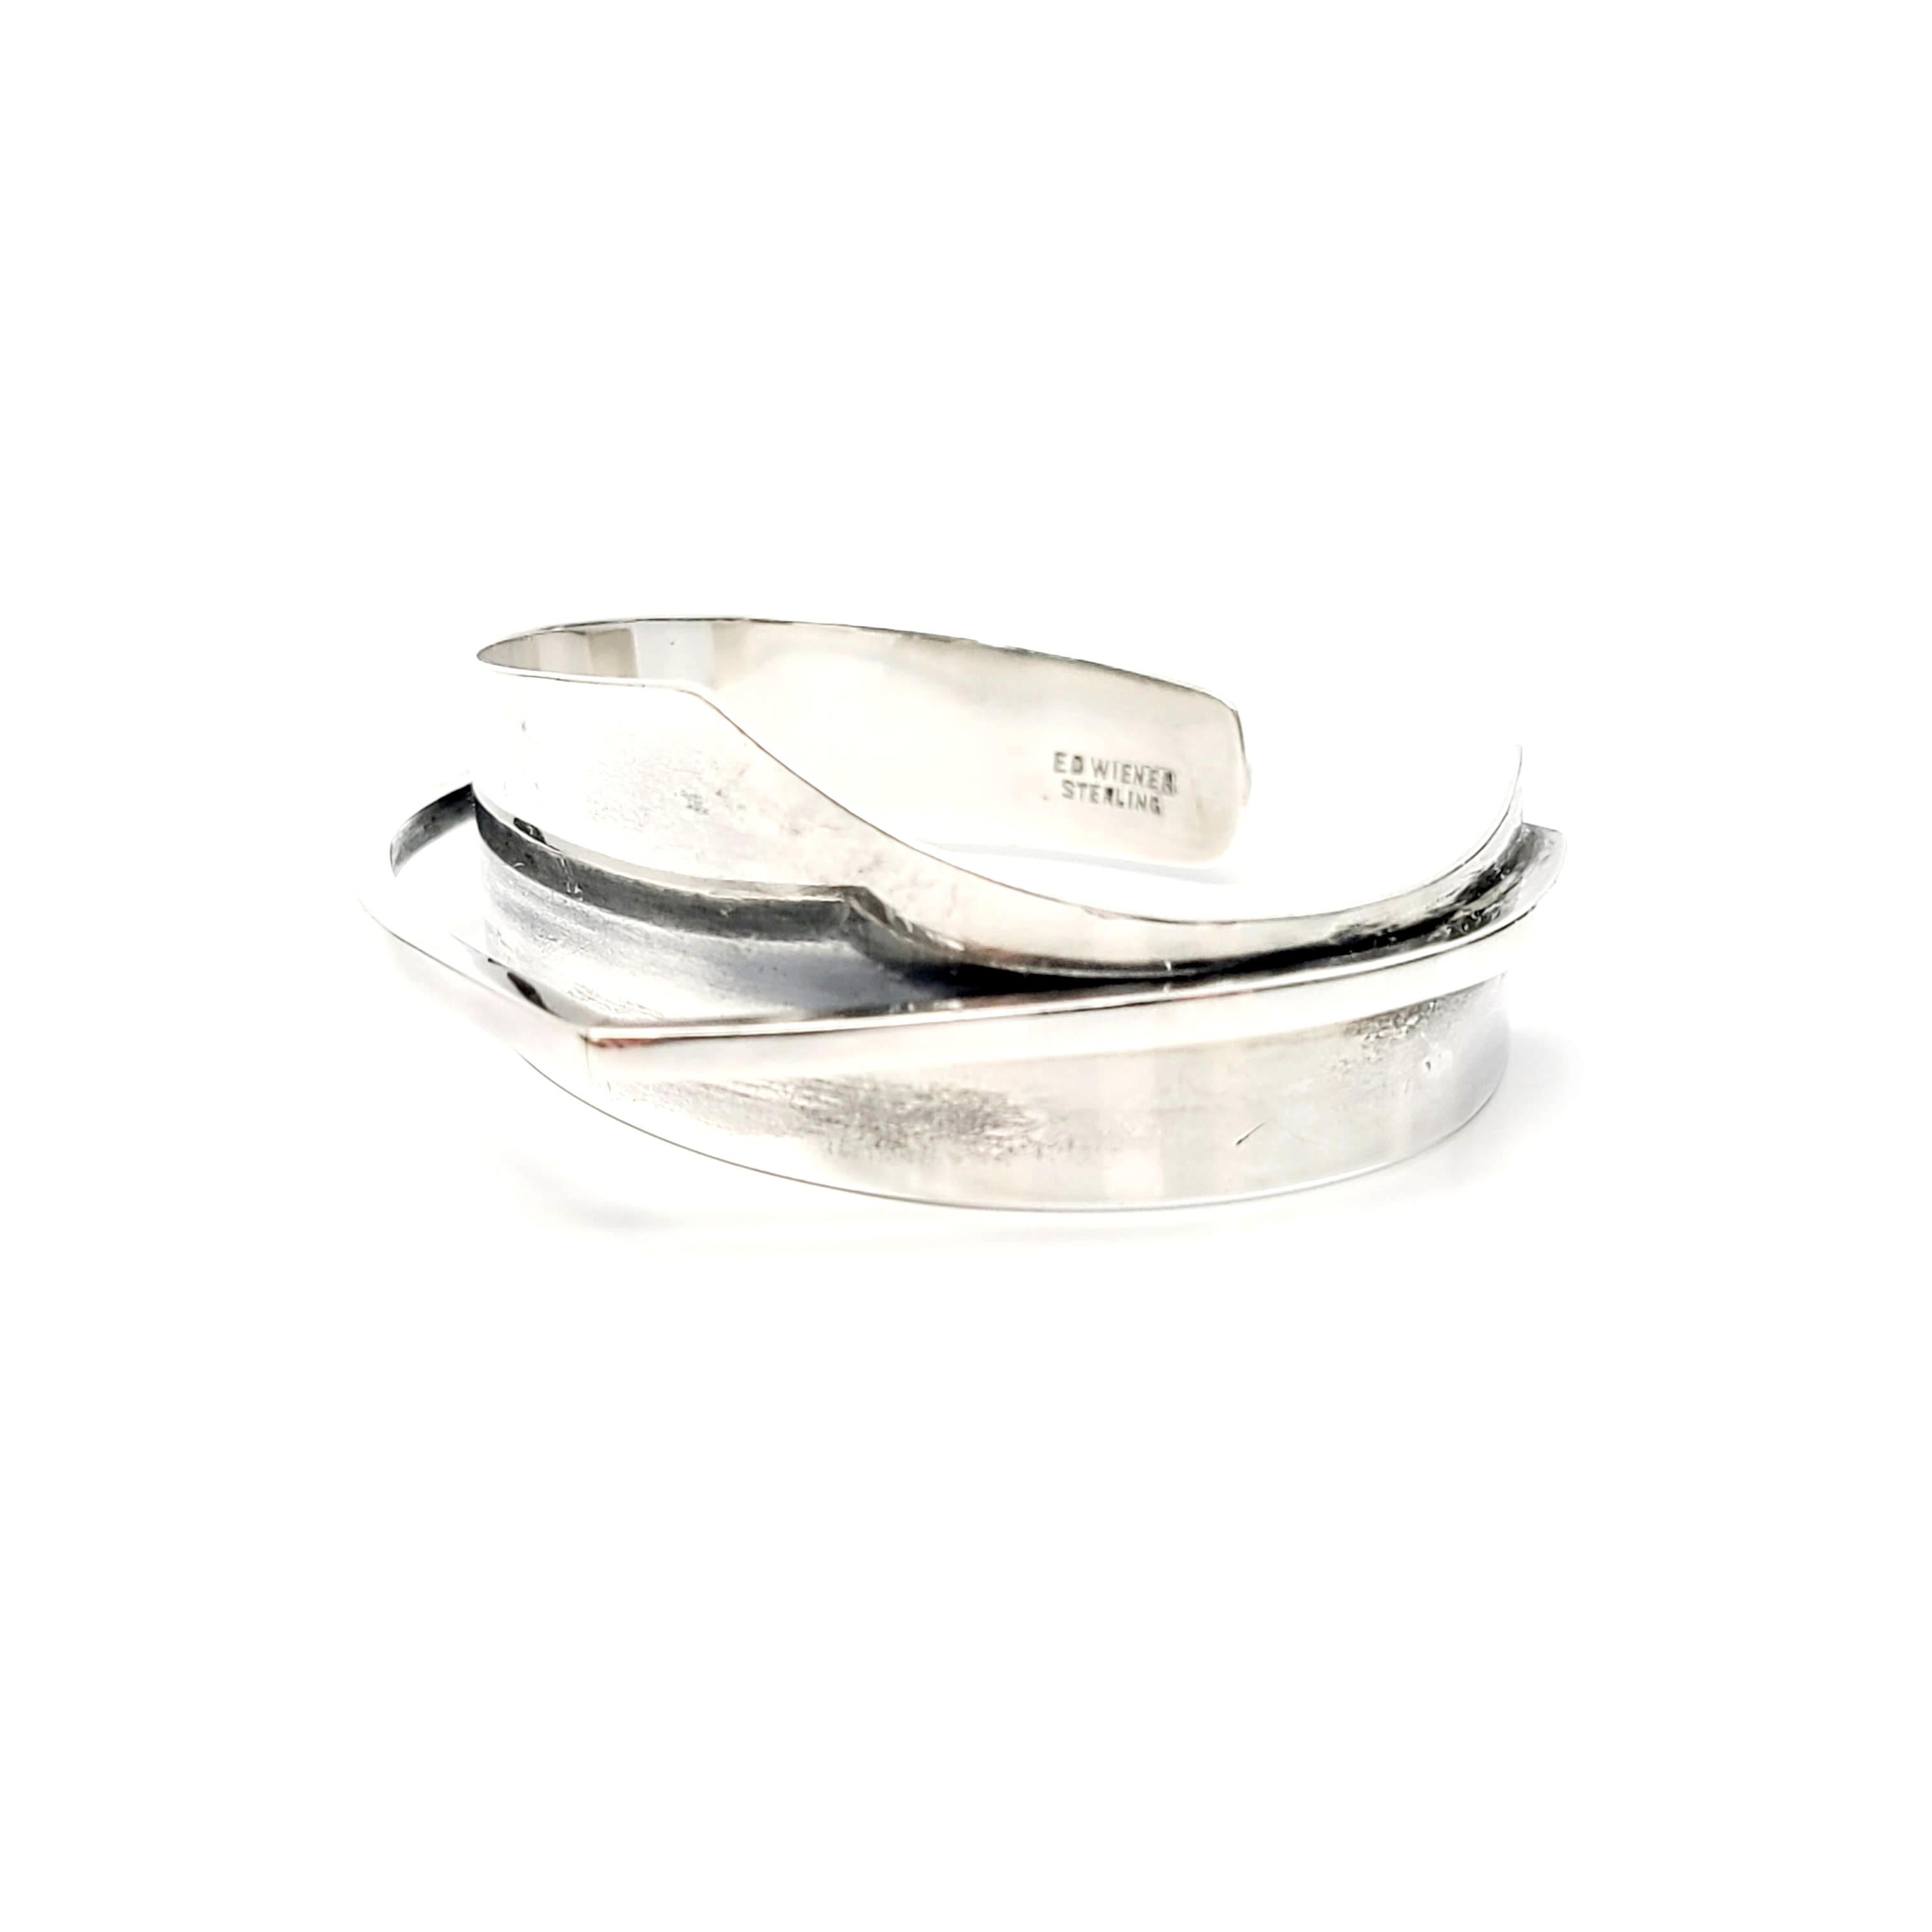 Vintage sterling silver modernist cuff bracelet by Ed Wiener, circa mid-20th Century.

Ed Wiener was a NYC based designer known for modernist, abstract and unique designs. This pieces features a bold asymmetrical design featuring a  smooth cuff with